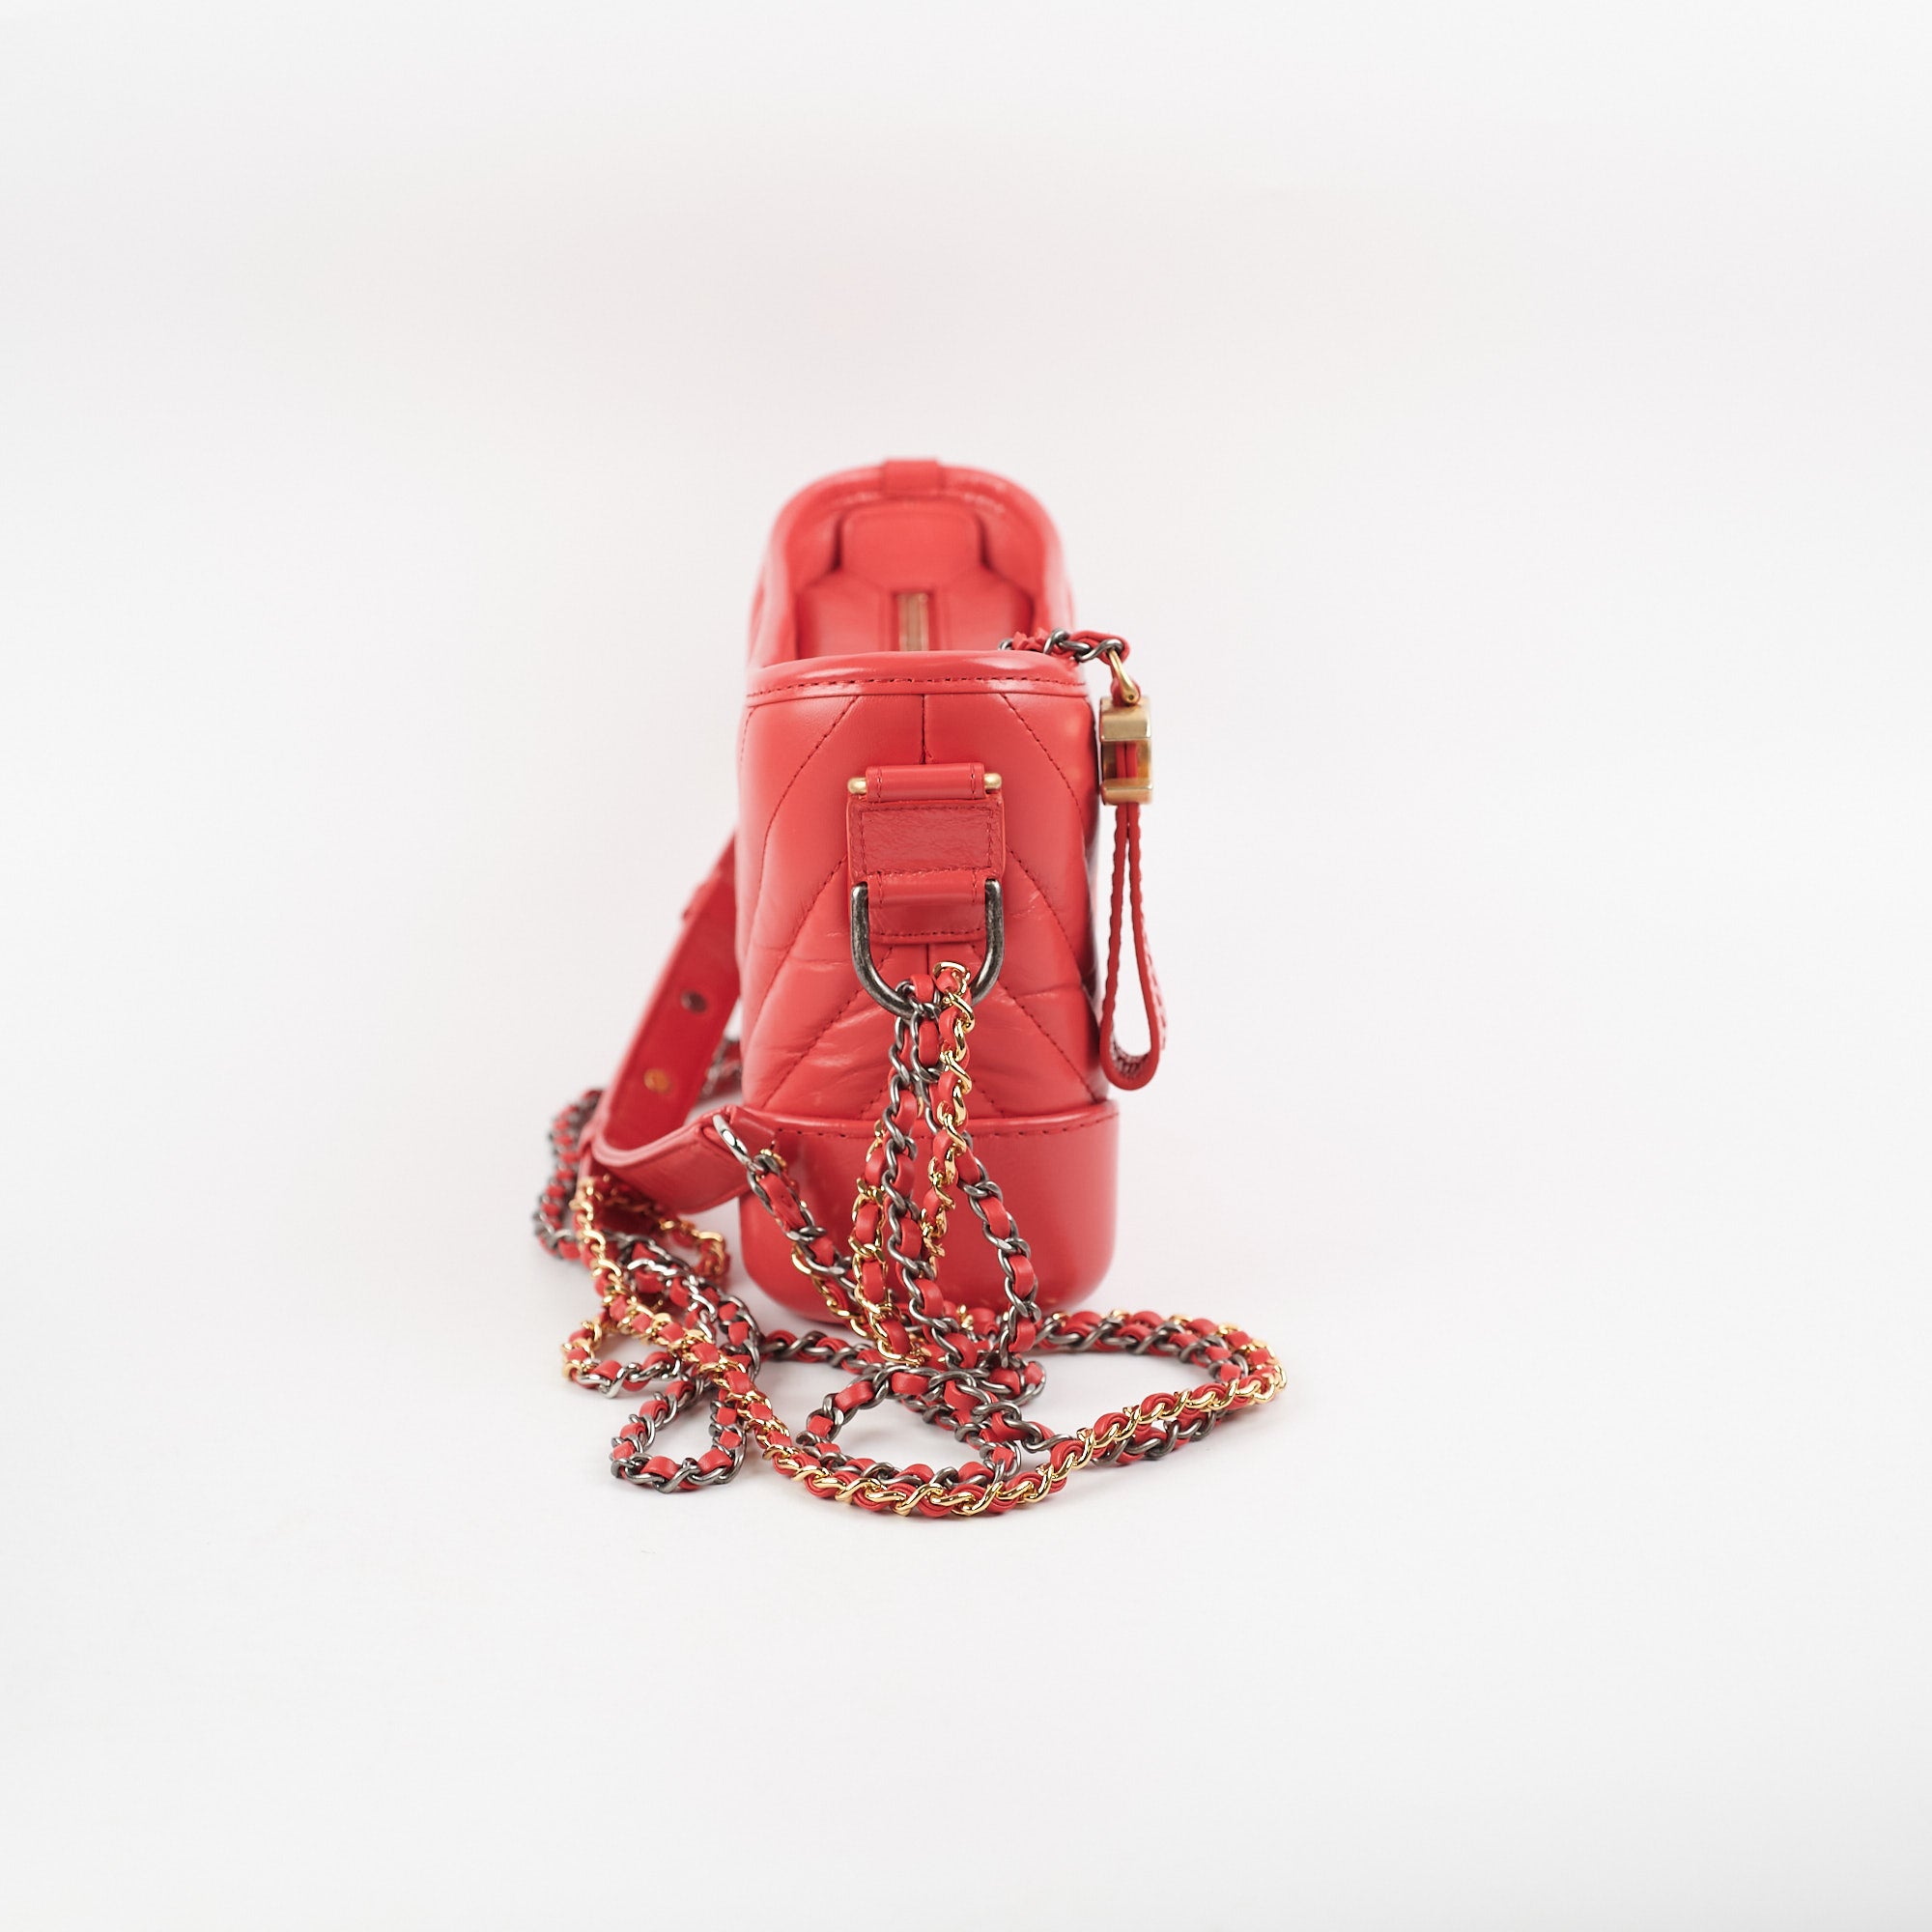 Chanel Red Suede and Leather Medium Gabrielle Hobo Bag  Yoogis Closet